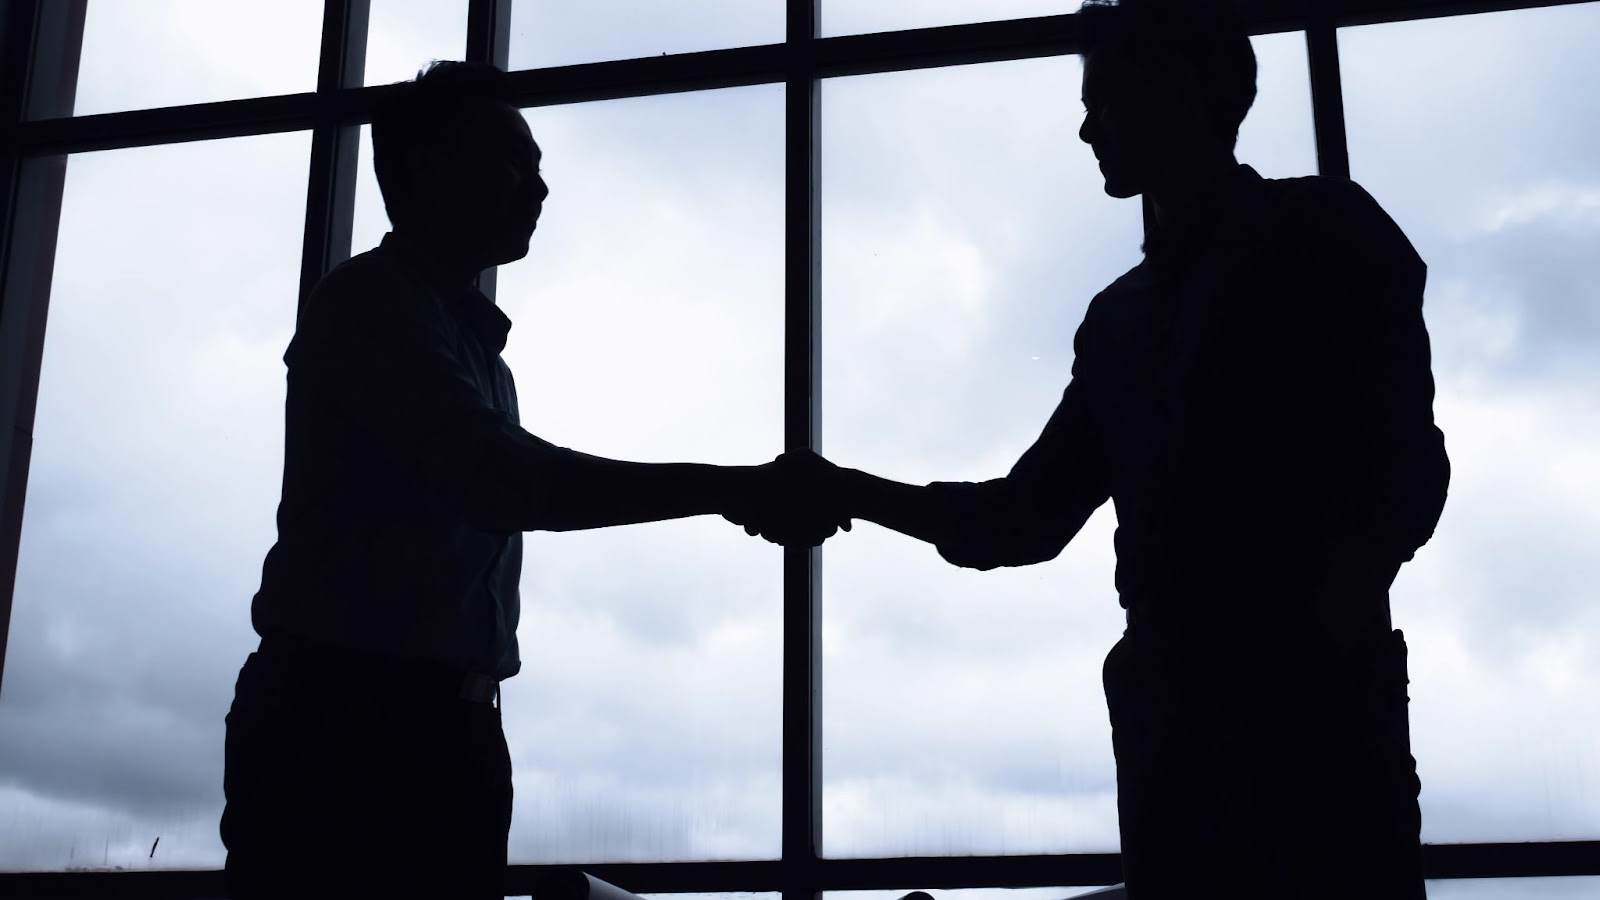 A show of two men in front of a high-rise window shaking hands